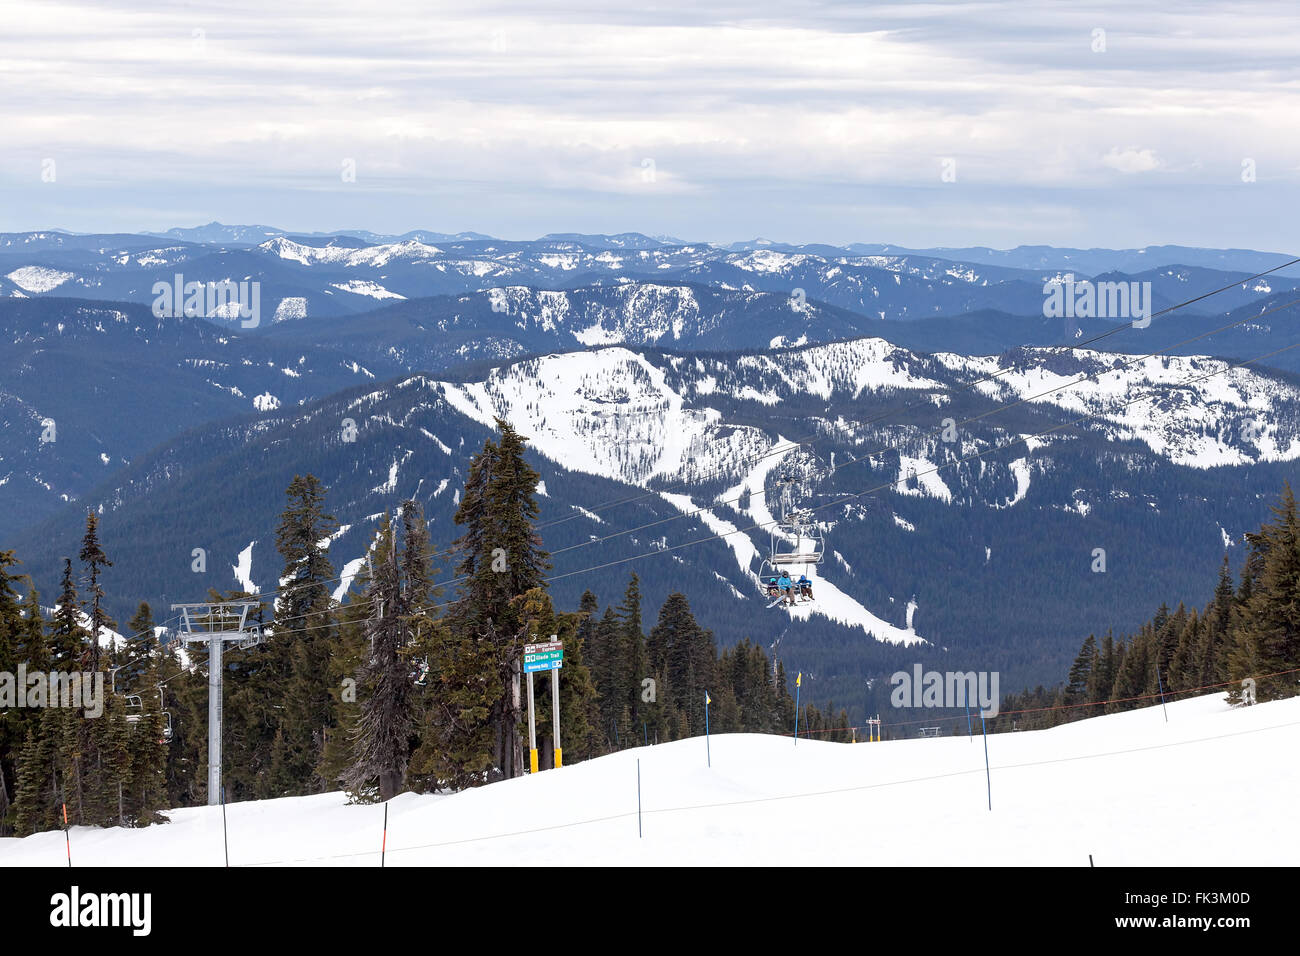 Snowboarders riding Ski Lifts up the slope of Mount Hood Oregon with Cascade Range view in Winter Season Stock Photo